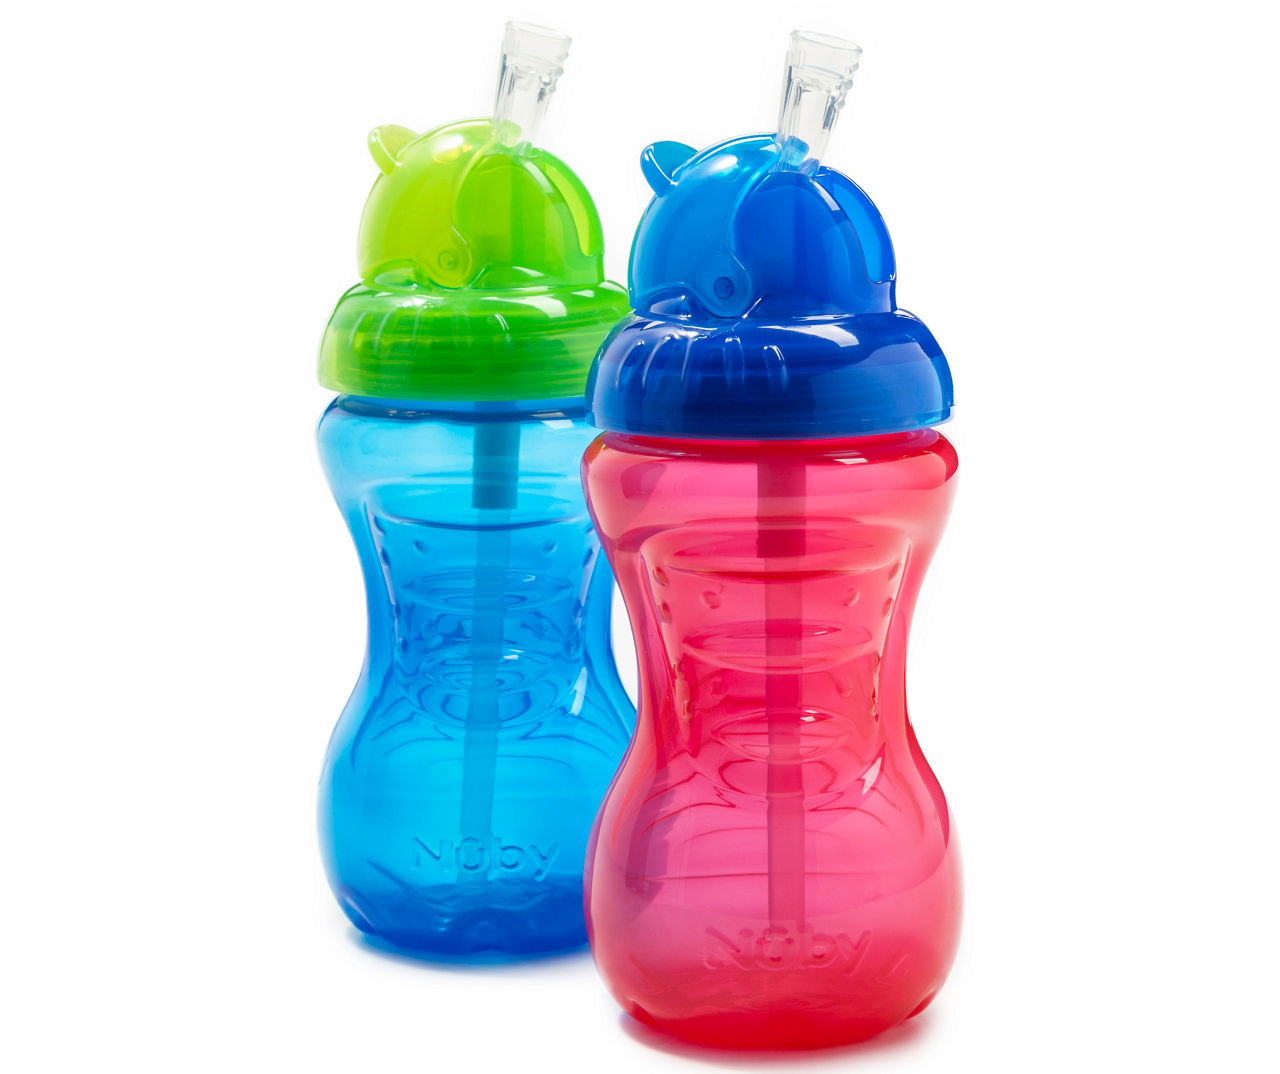 Nuby 2-Pack No-Spill Flip-It Cups, 10 Ounce, Colors May Vary